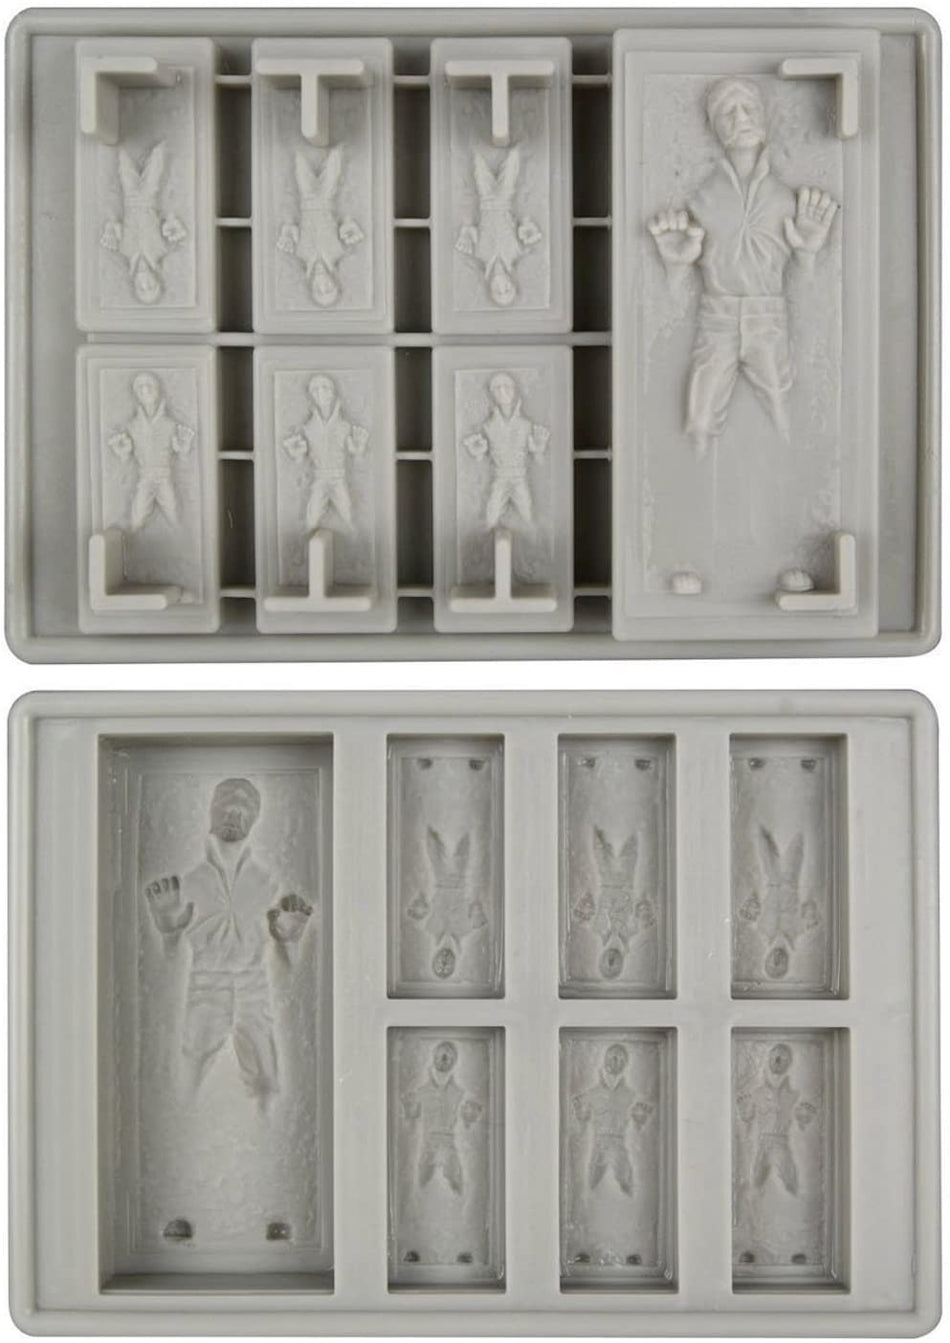 Ice Tray: Han Solo In Carbonite